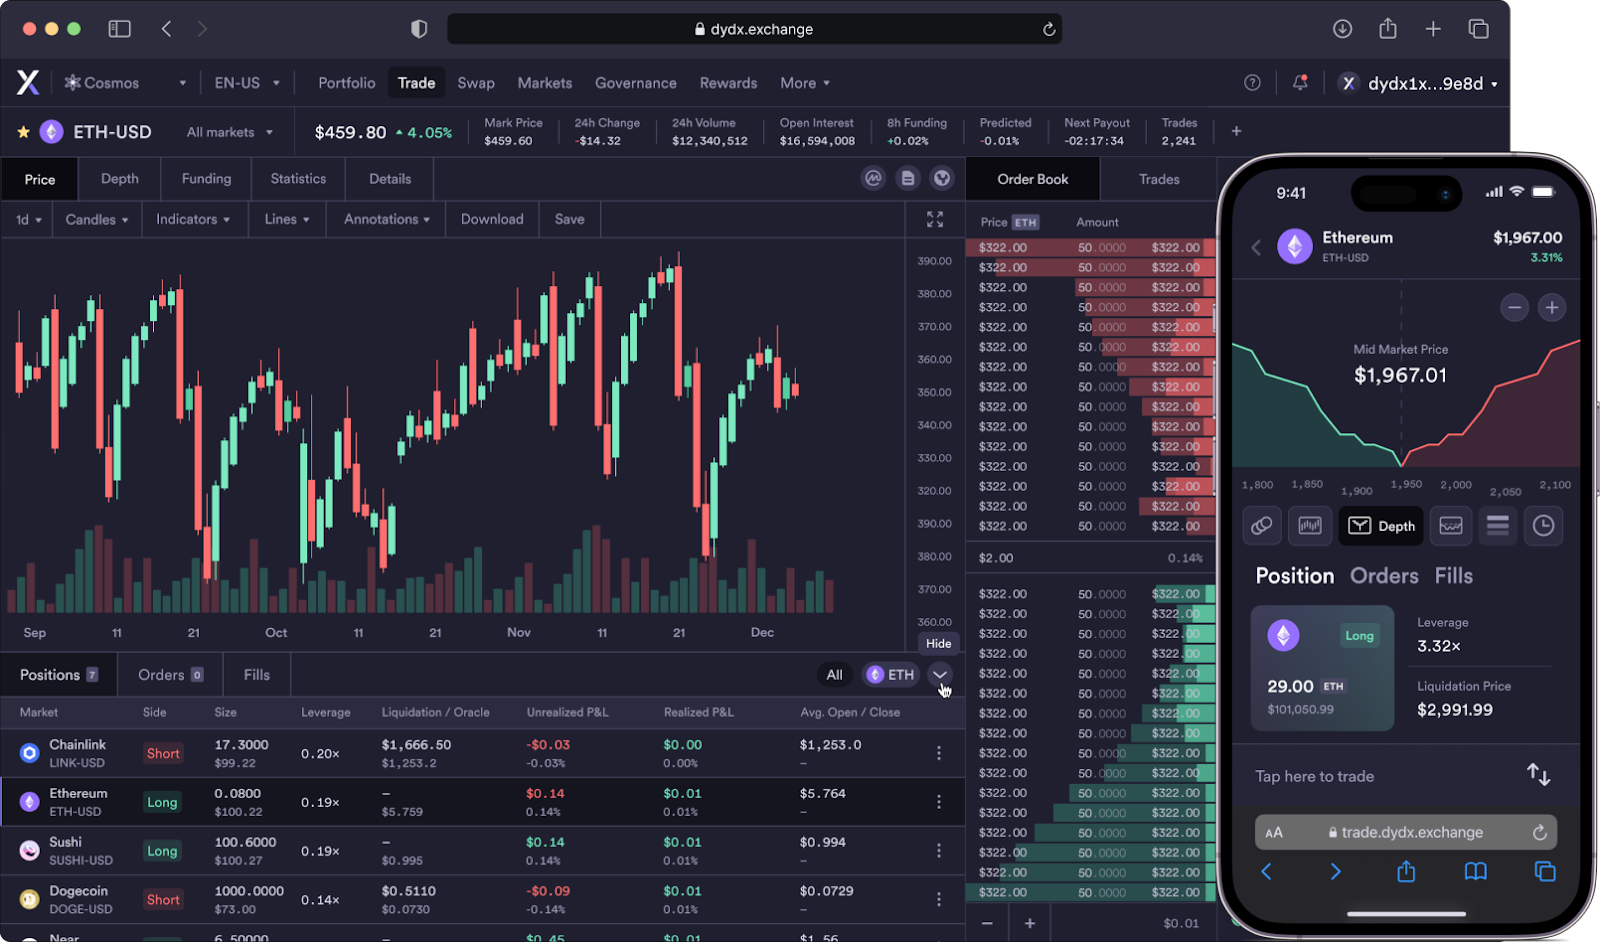 Operating on top of dYdX Chain, the dYdX protocol leverages the utility of two main front-end systems including its mobile versions and desktop version. As you can see, this exchange application is very well designed and easy to use, thus greatly simplifying the overall user-experience for traders and investors alike. (Image Credit: Google Image Search via the dYdX website)